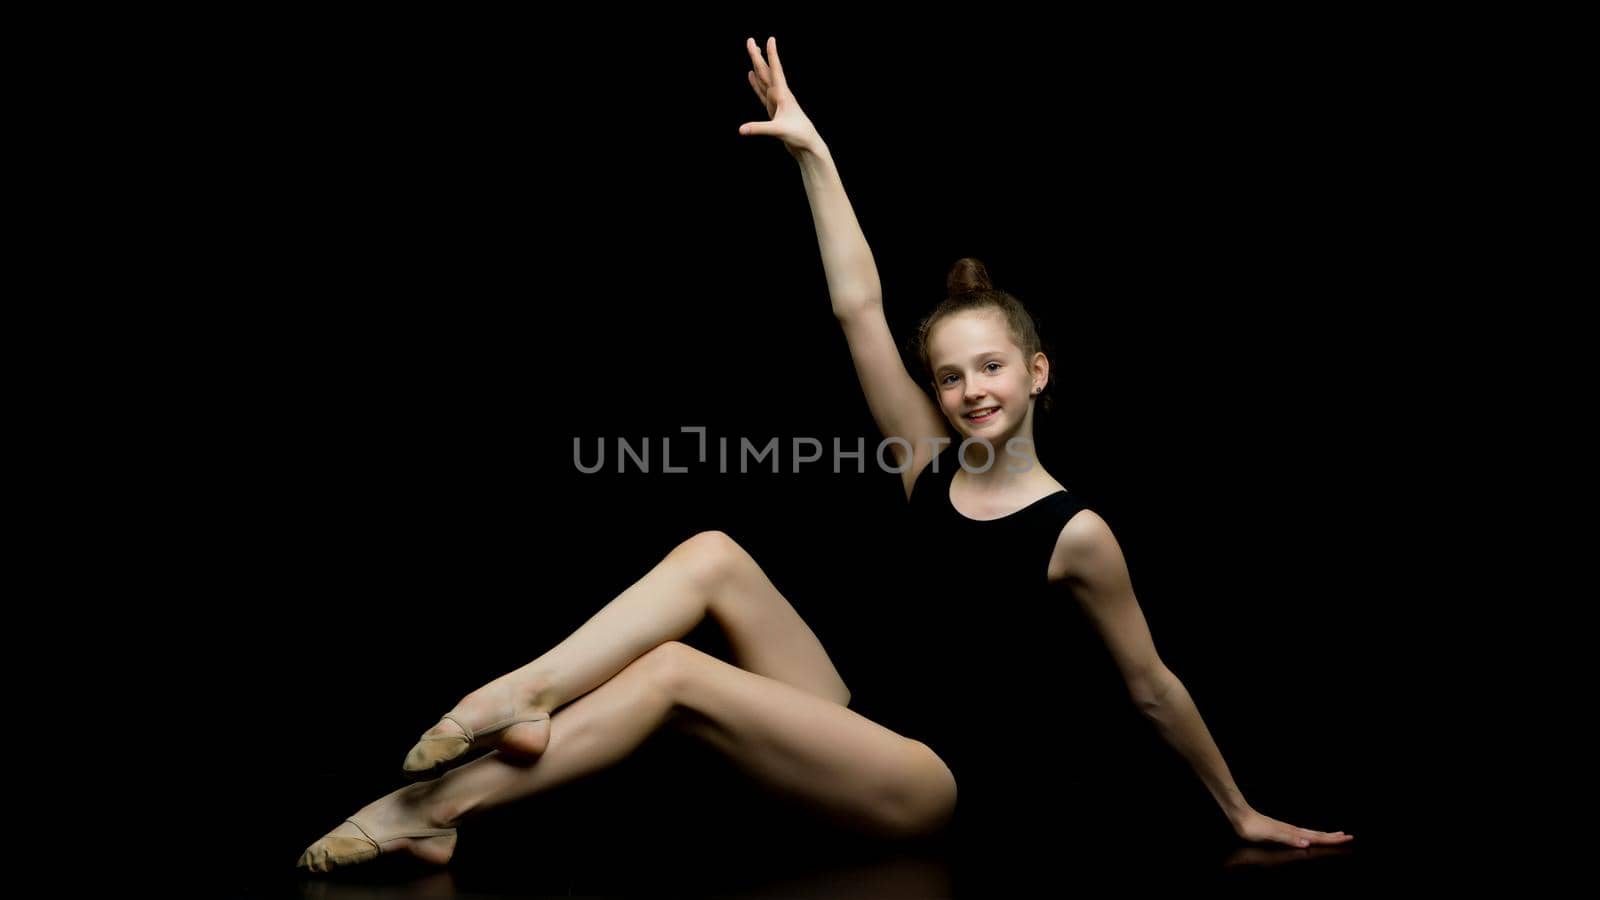 Beautiful girl gymnast performs gymnastic exercise in a photo studio on a black background. The concept of sports, a healthy lifestyle